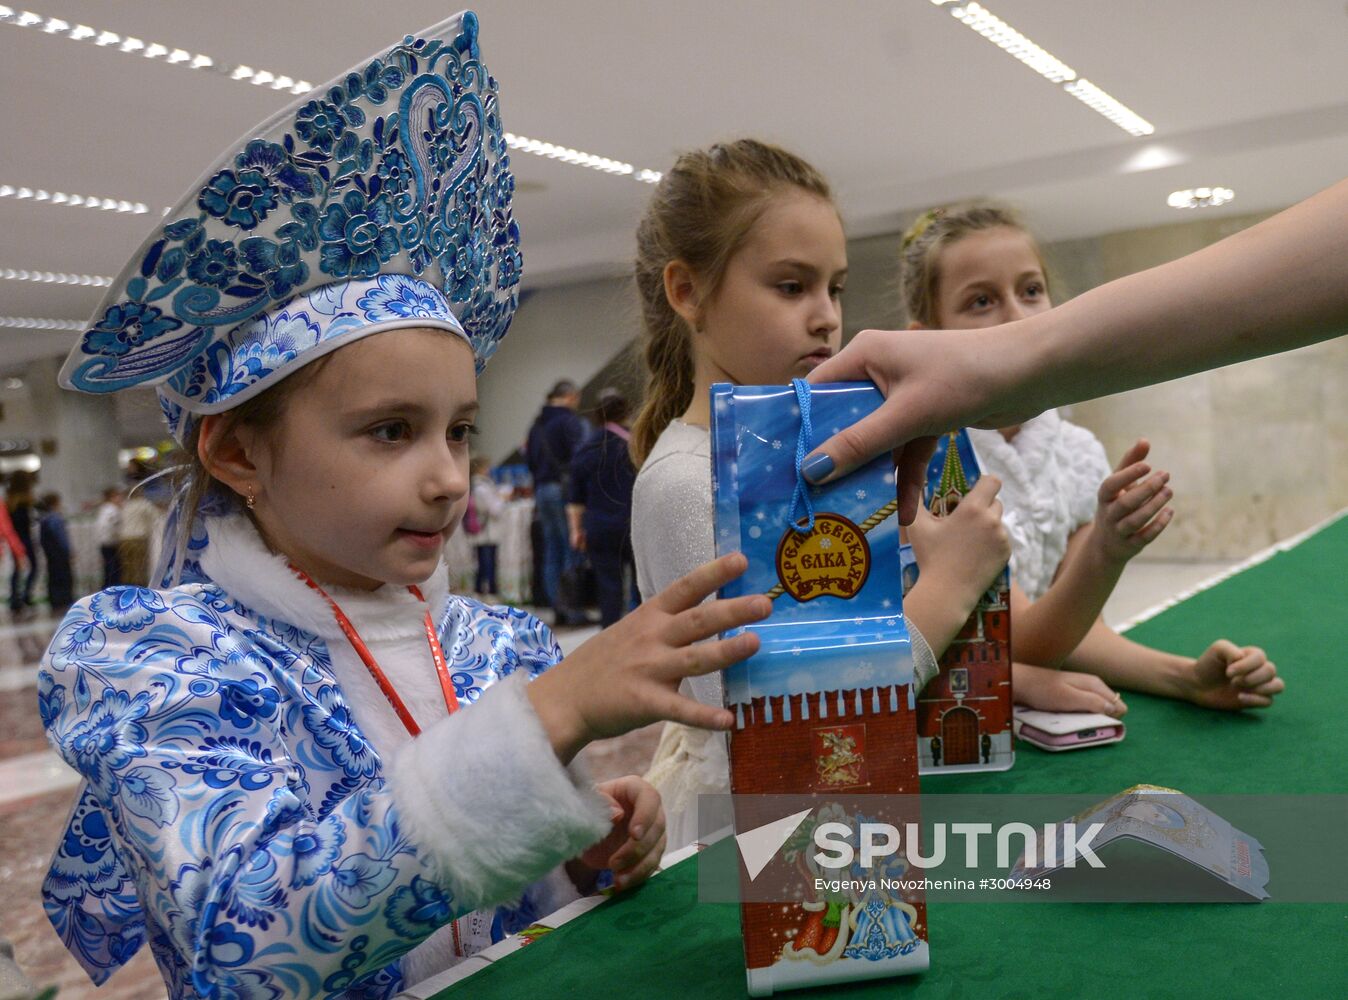 New Year's party for children at State Kremlin Palace